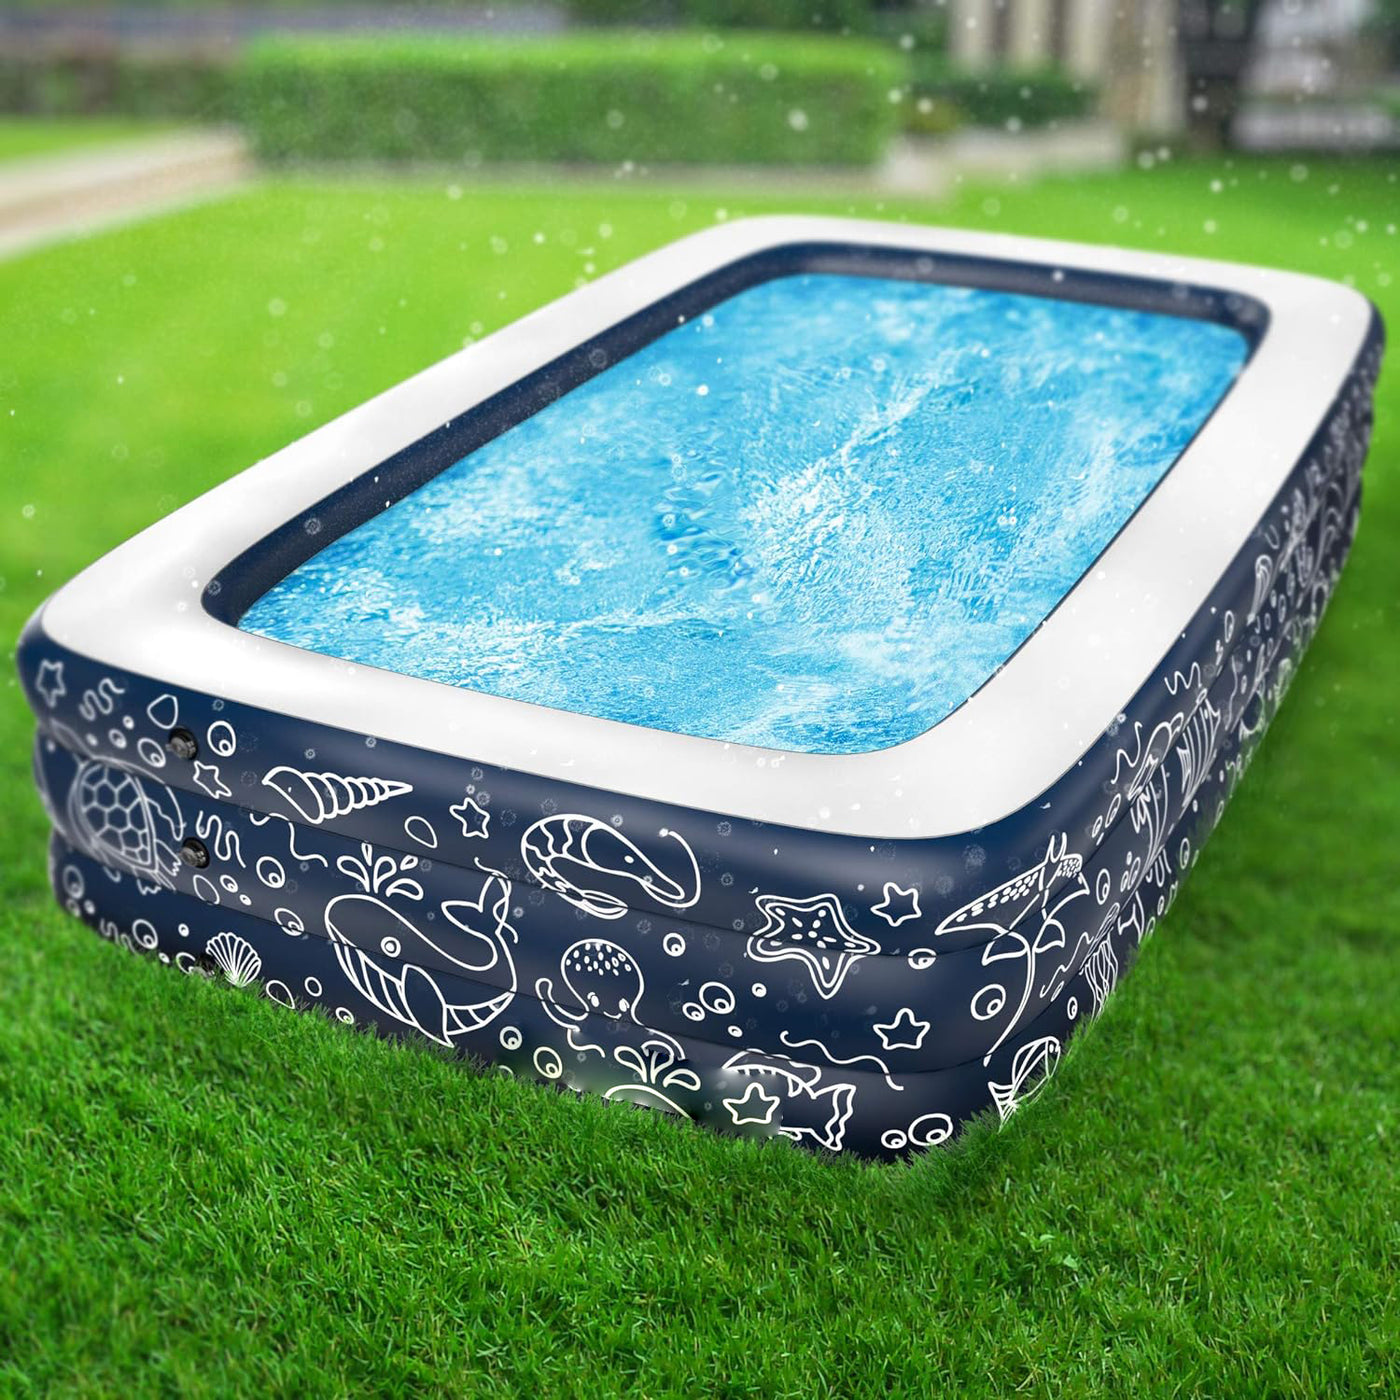 Inflatable Pool, XL Above Ground Swimming Pool for Kiddie/Kids/Adults/Family, Dark Blue (Large 10'x6' Ft / 22" Inches Deep)